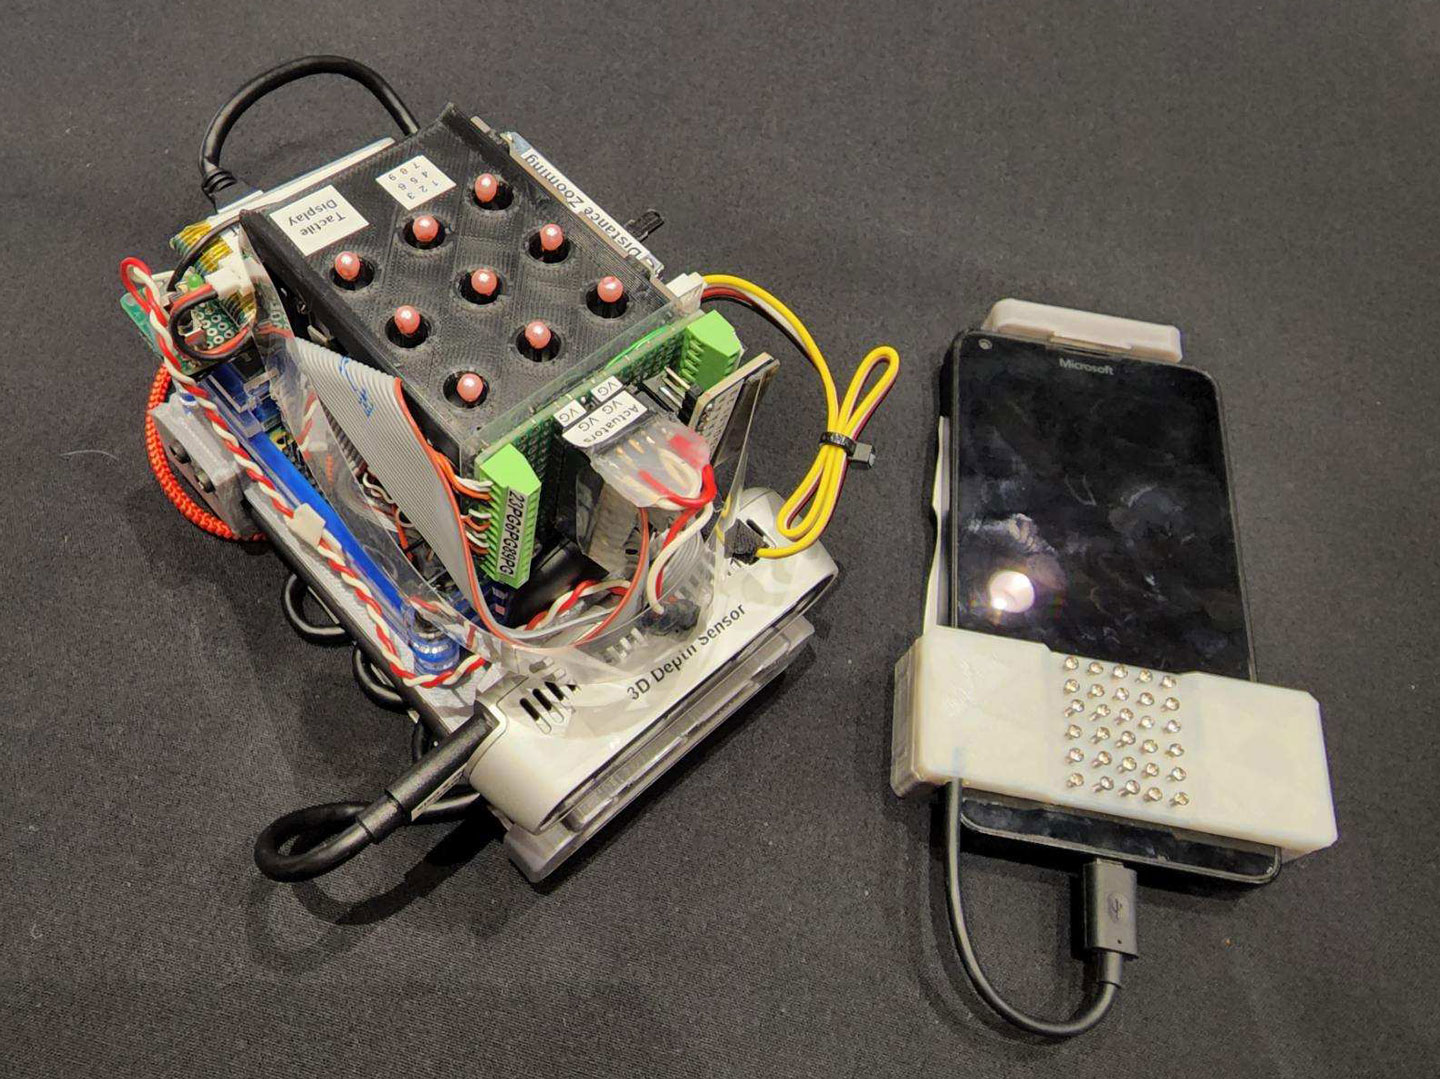 a handheld device with wires and buttons sits on a gray table beside a smartphone